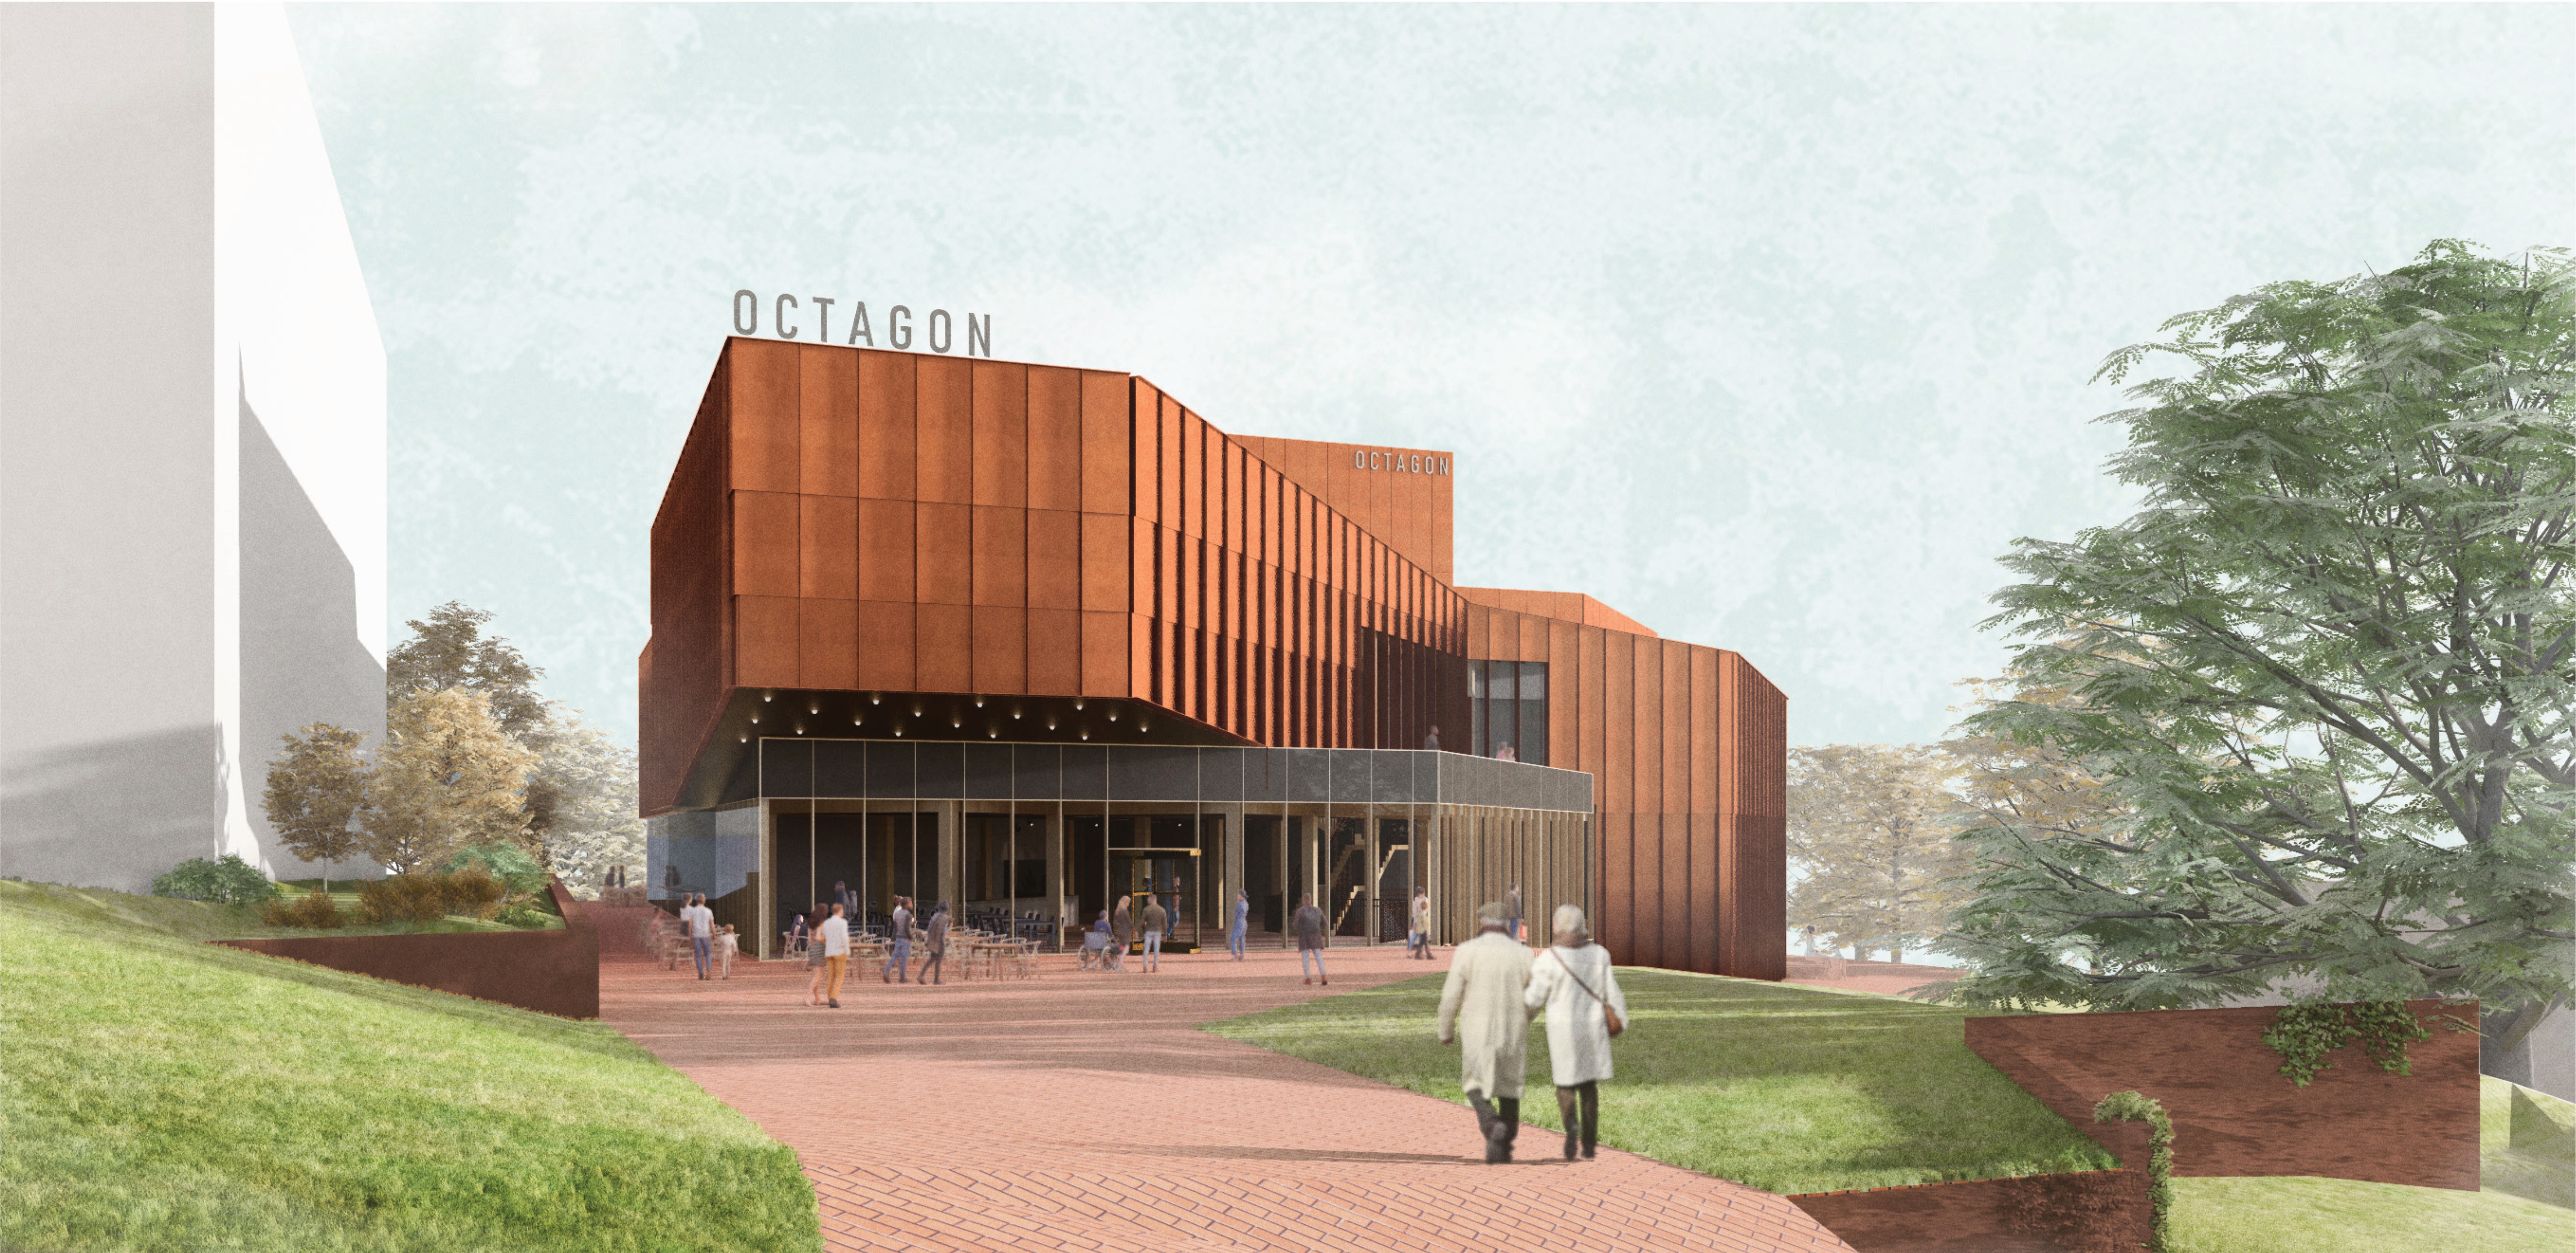 External artists  impression of the redeveloped Octagon Theatre from Petters Way car park